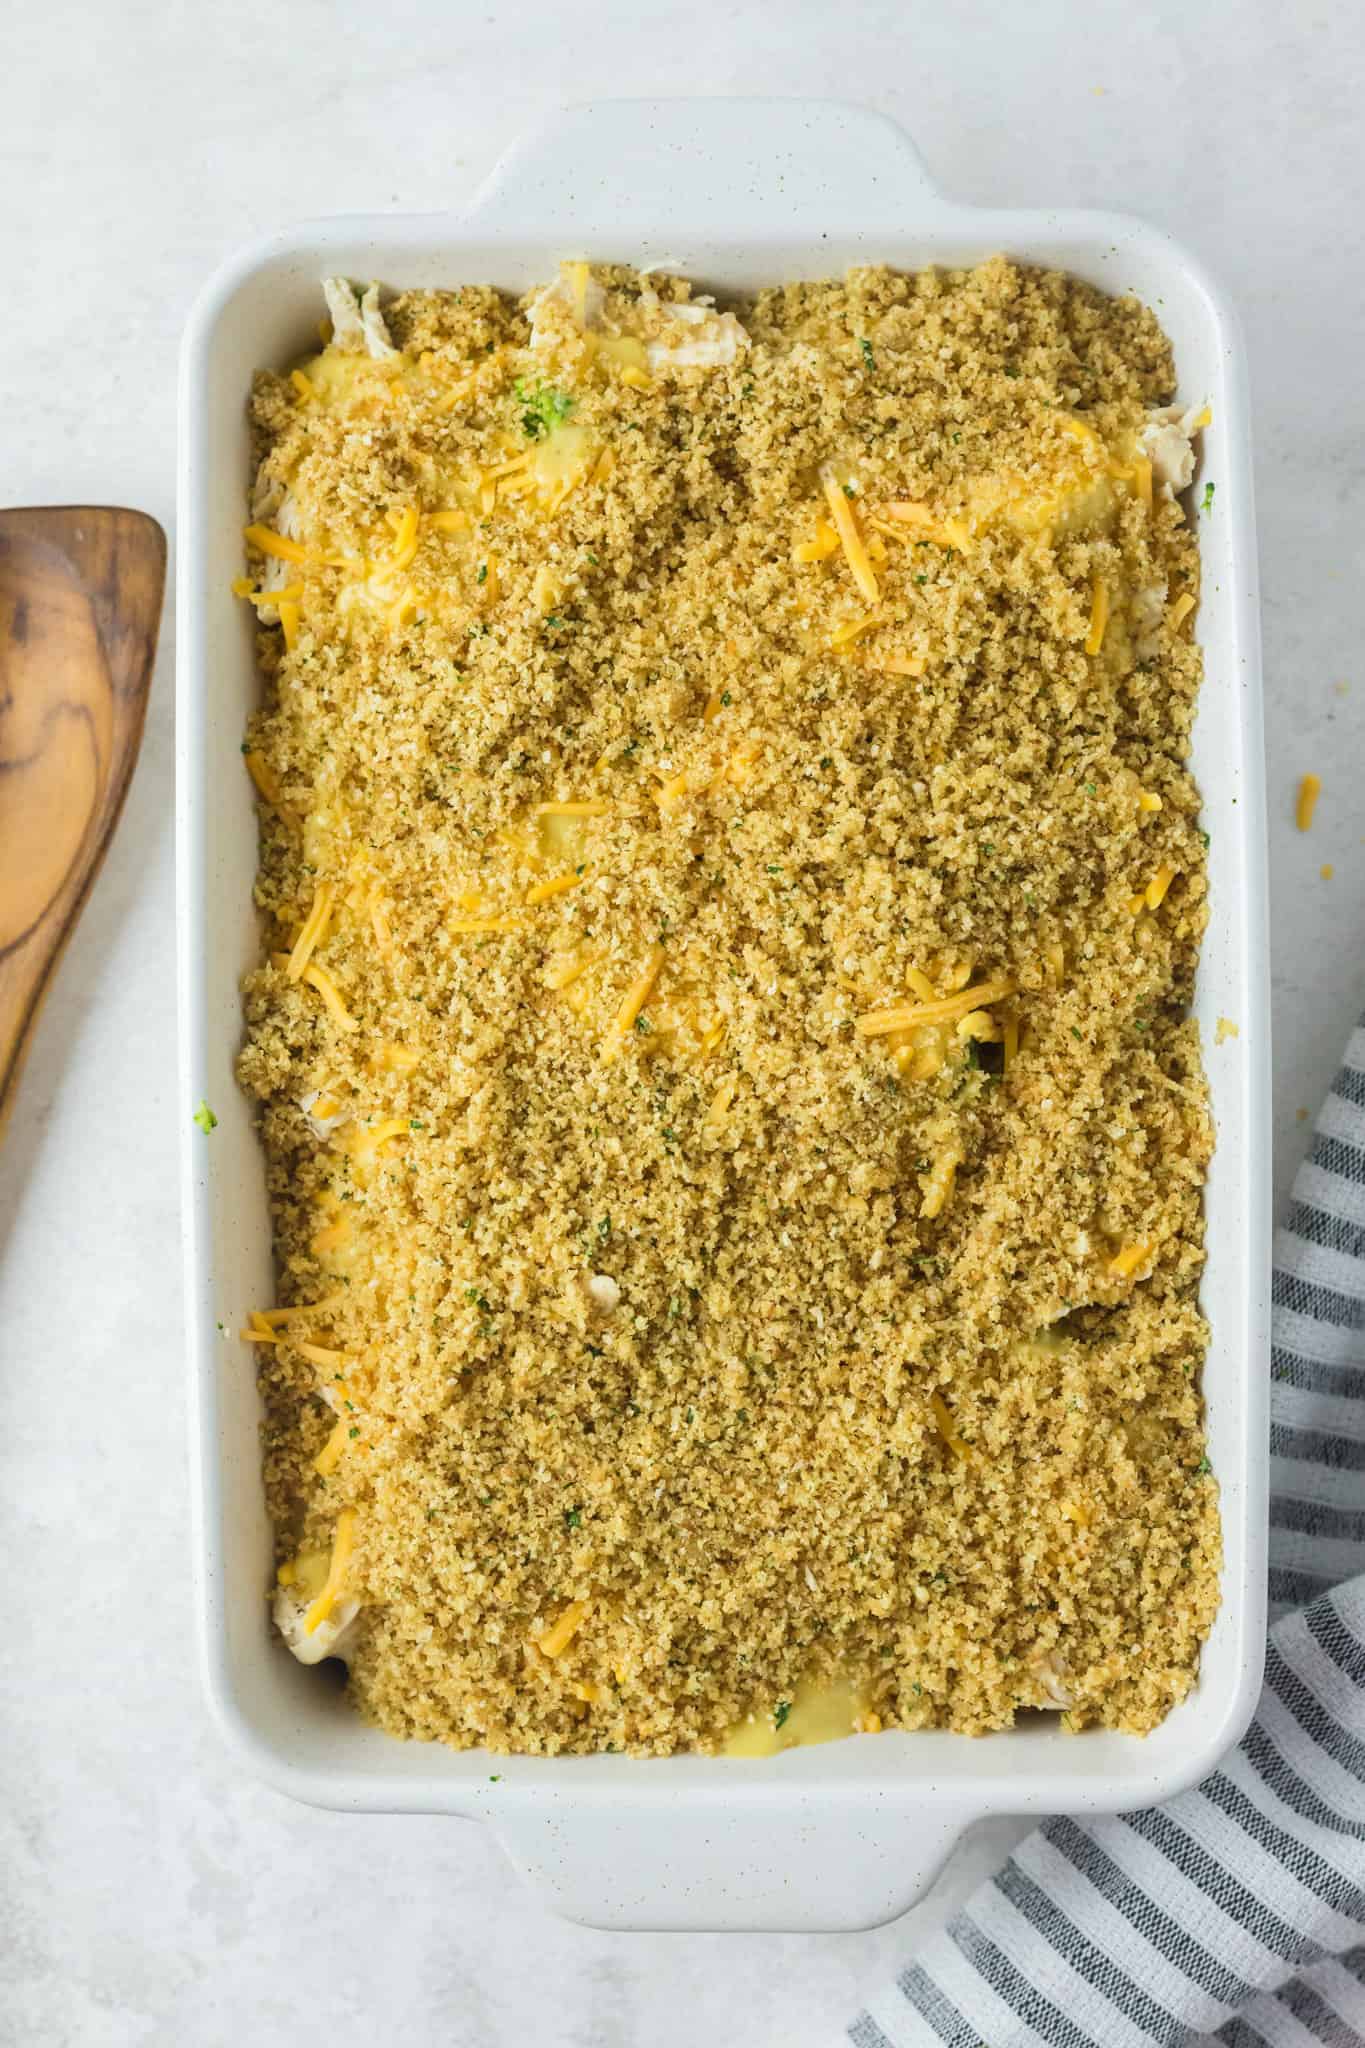 bread crumb mixture sprinkled on top of chicken and broccoli casserole